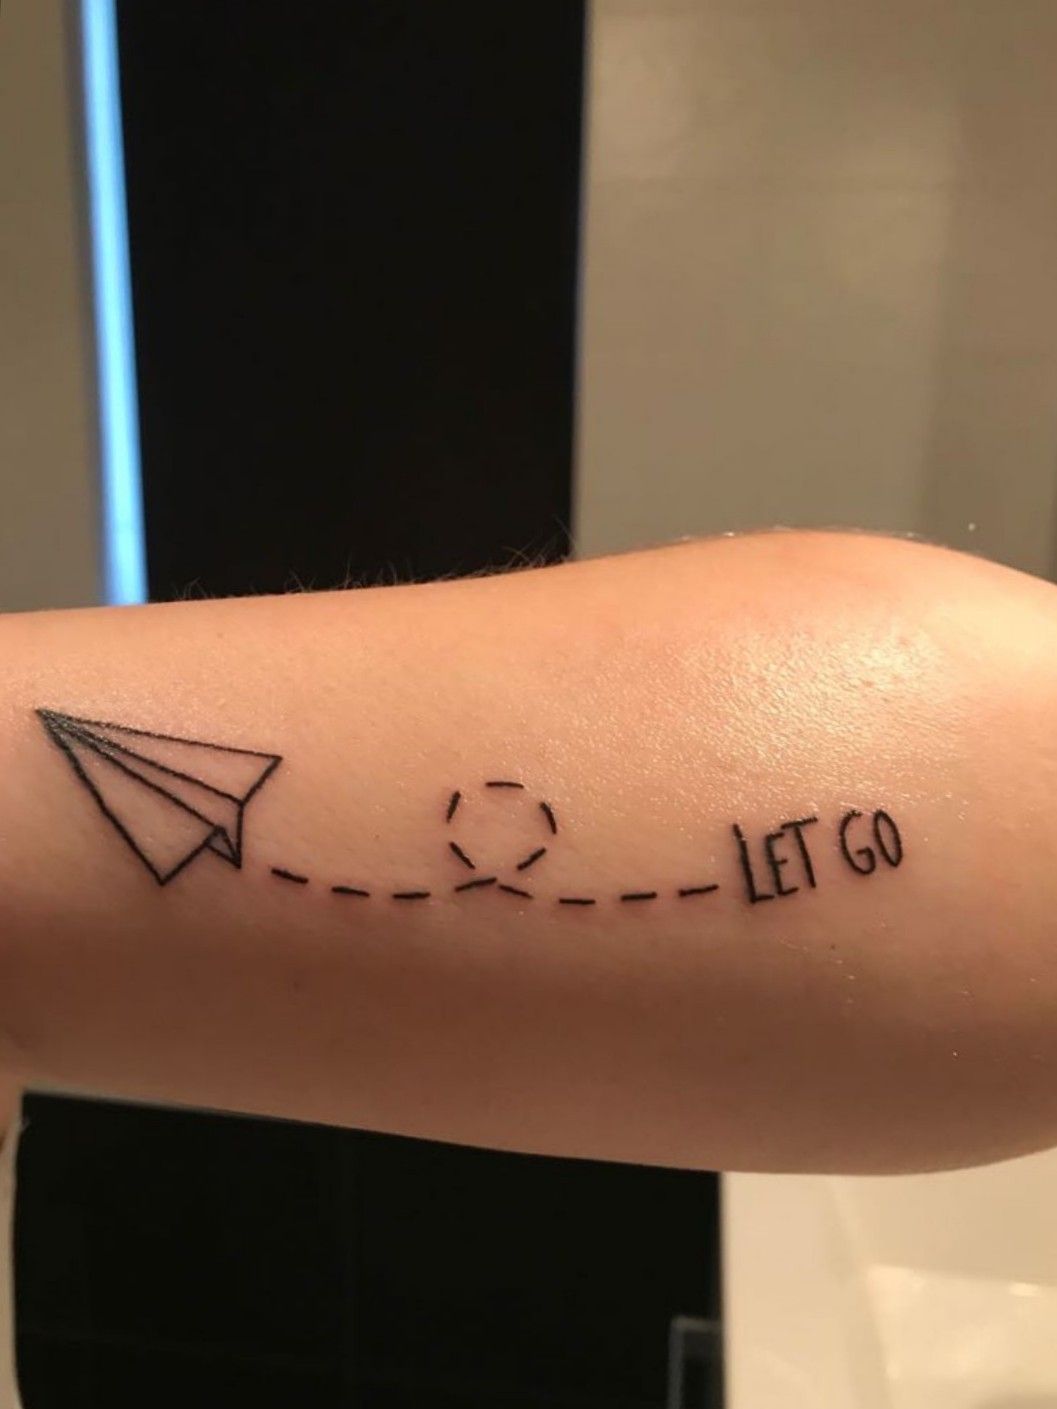 Tattoo that says let go handwritten on the wrist